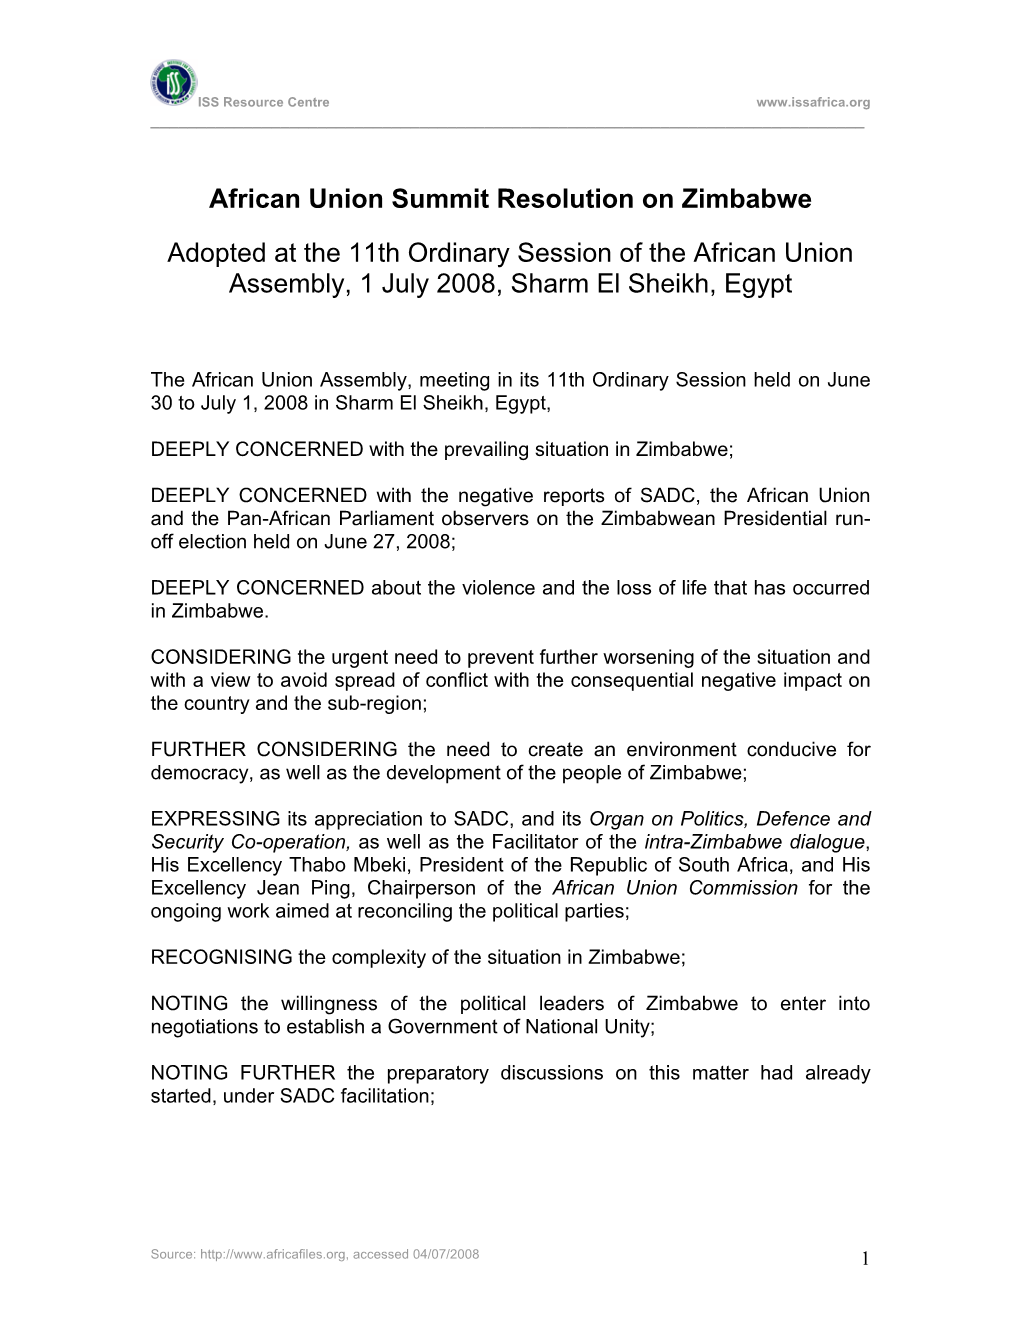 African Union Summit Resolution on Zimbabwe Adopted at the 11Th